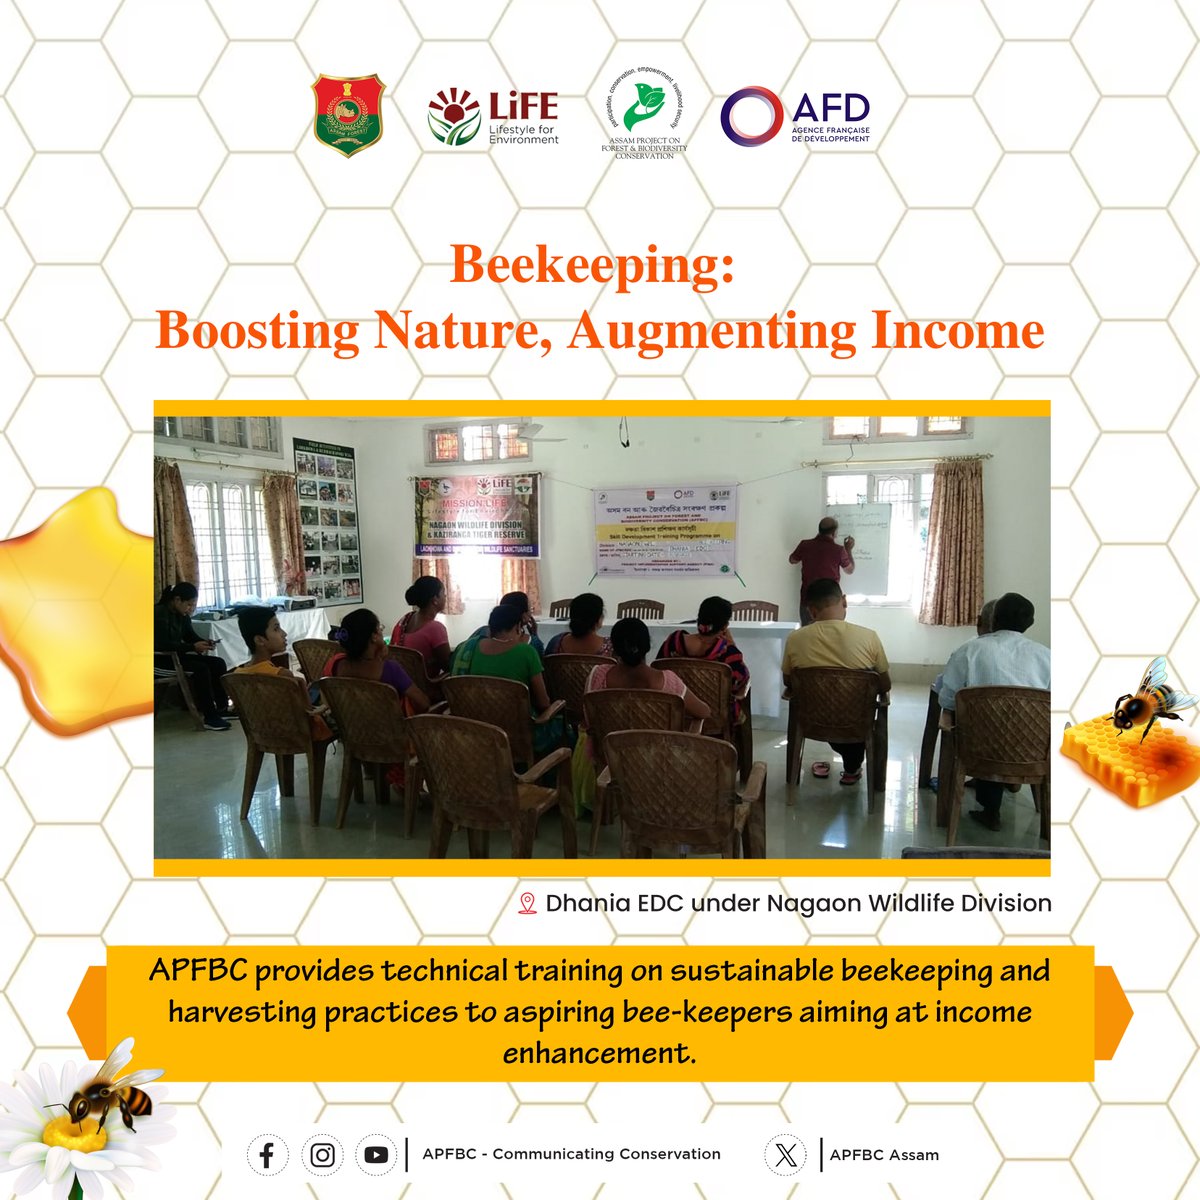 APFBC promotes eco-friendly beekeeping, distributing apiary boxes to support pollinators and uplift communities. Join us in cultivating a greener world together.

#sustainablebeekeeping
#SkillTraining
#CommunityEmpowerment
#communityengagement

@mkyadava